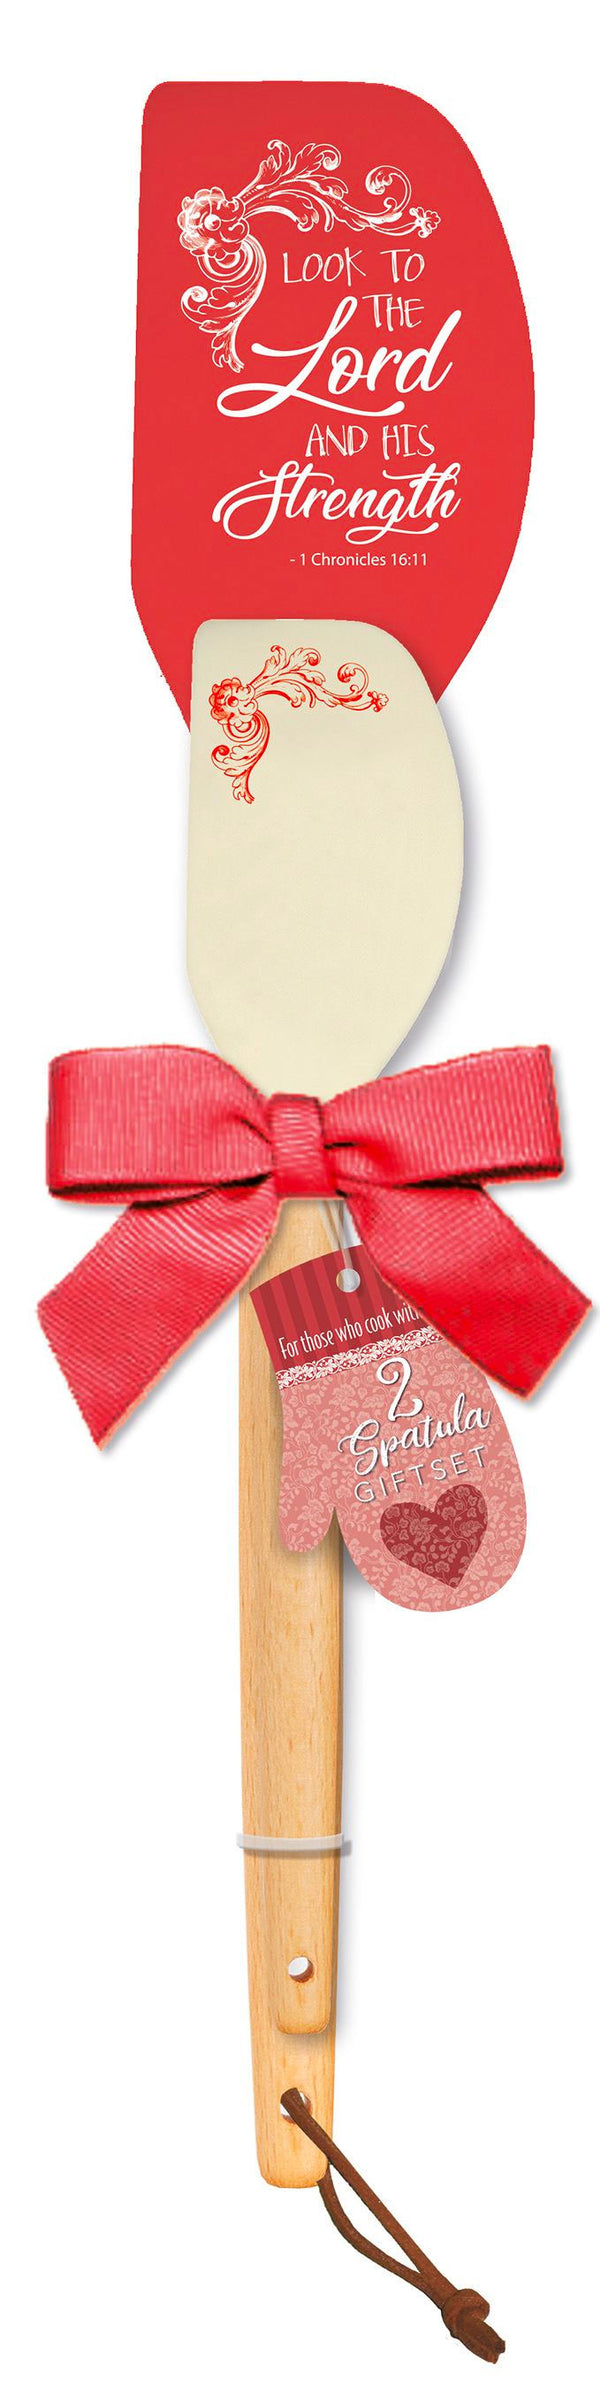 Our spatula giftset is for those who cook with love. Set includes 2 spatulas with silicon heads and solid wood handles. Large spatula measures 12" x 2.5" x 0.75". Small spatula measures 9.5" x 2" x 0.5". Features scripture. Material: Silicone / Wood.